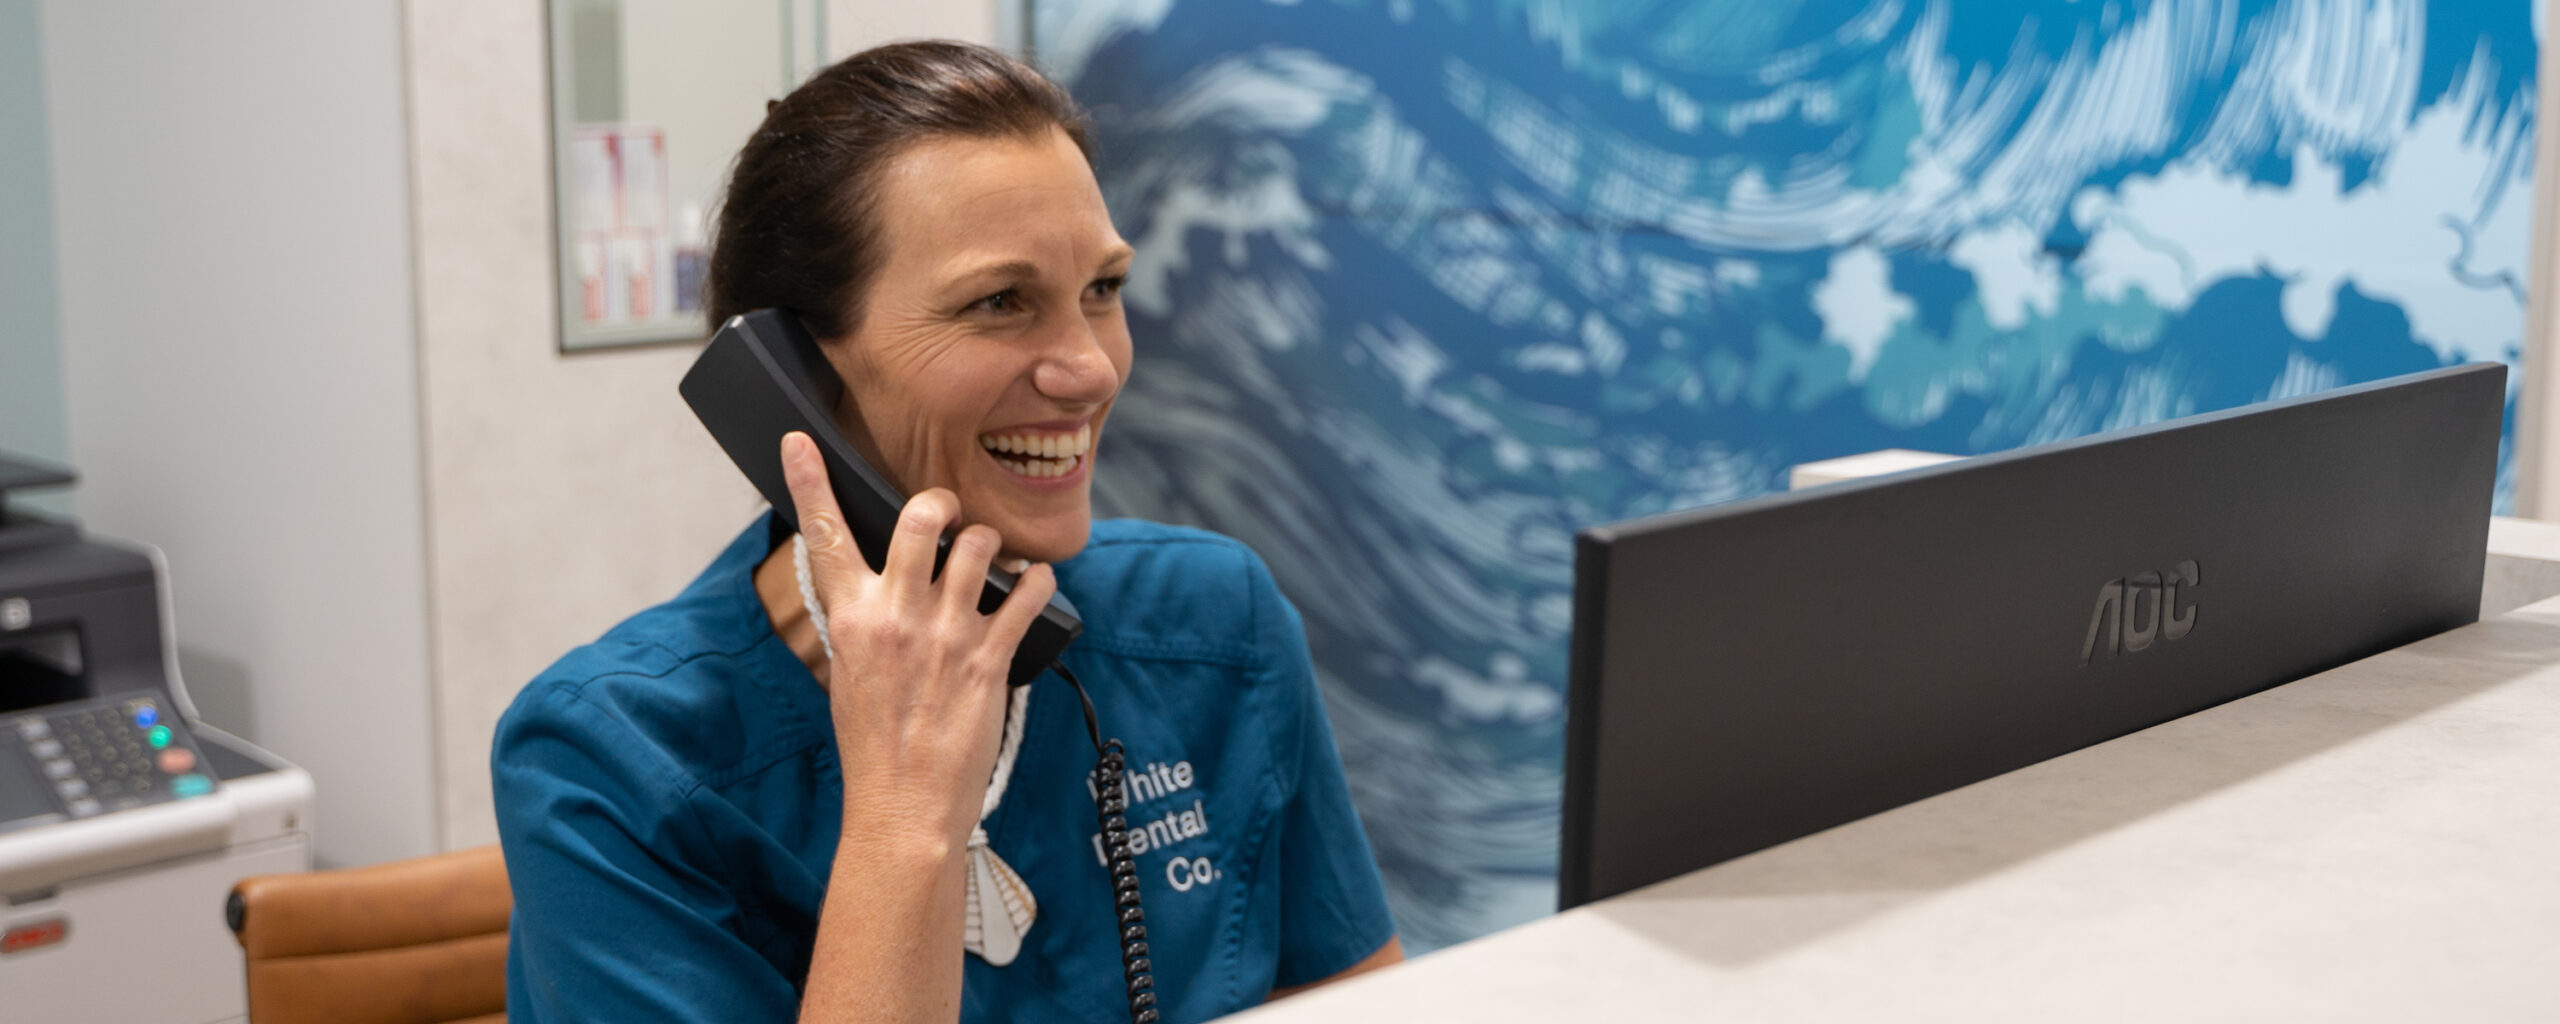 Dental Assistant Kelly sits at White Dental Co.'s reception desk, making an emergency dental appointment for a patient who is calling on the phone.